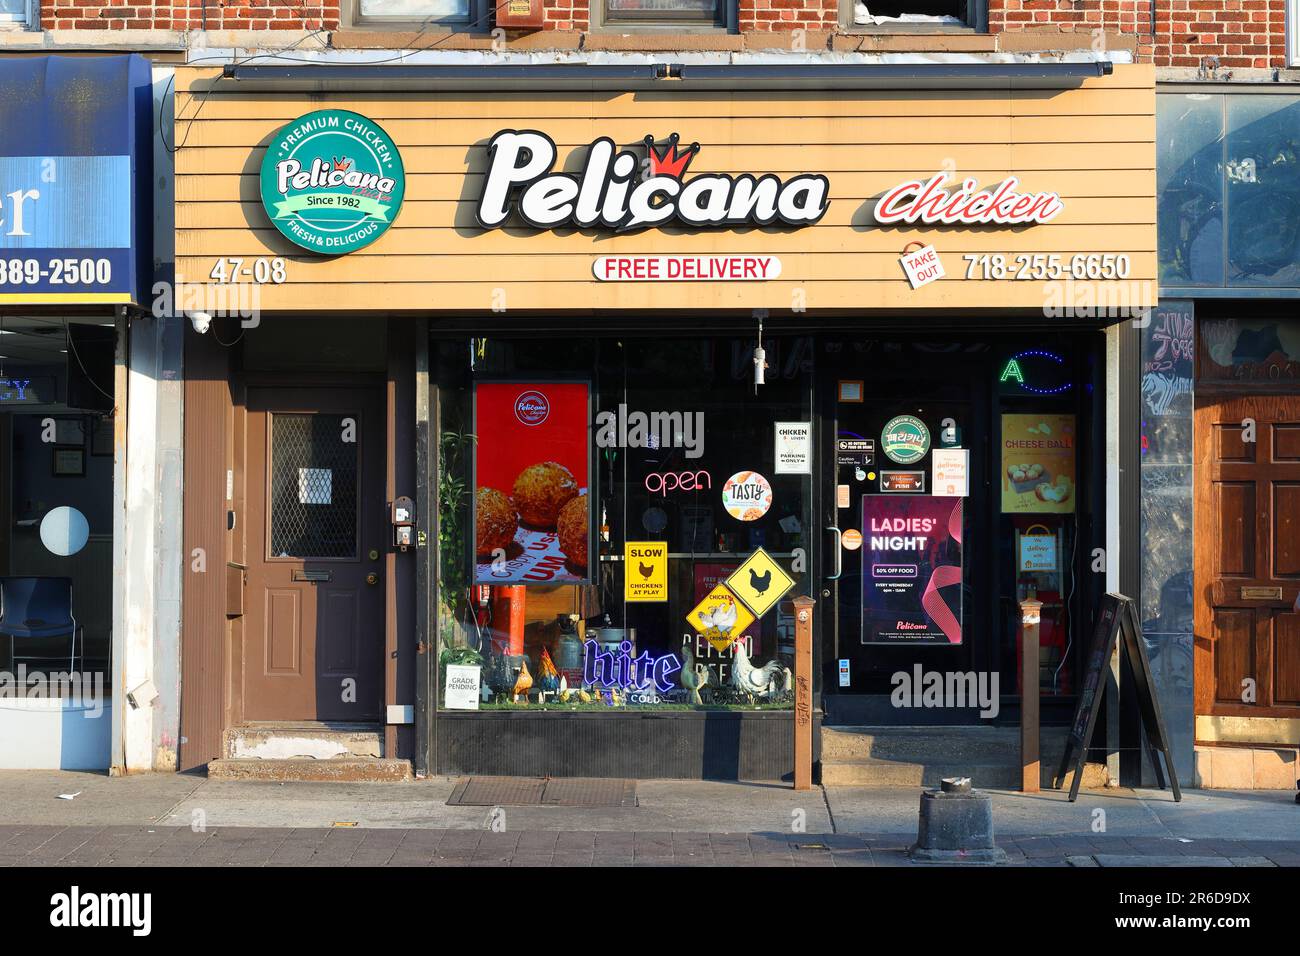 Pelicana Chicken, 47-08 Greenpoint Ave, Queens, NYC storefront photo of a Korean fried chicken restaurant in the Sunnyside neighborhood, New York. Stock Photo